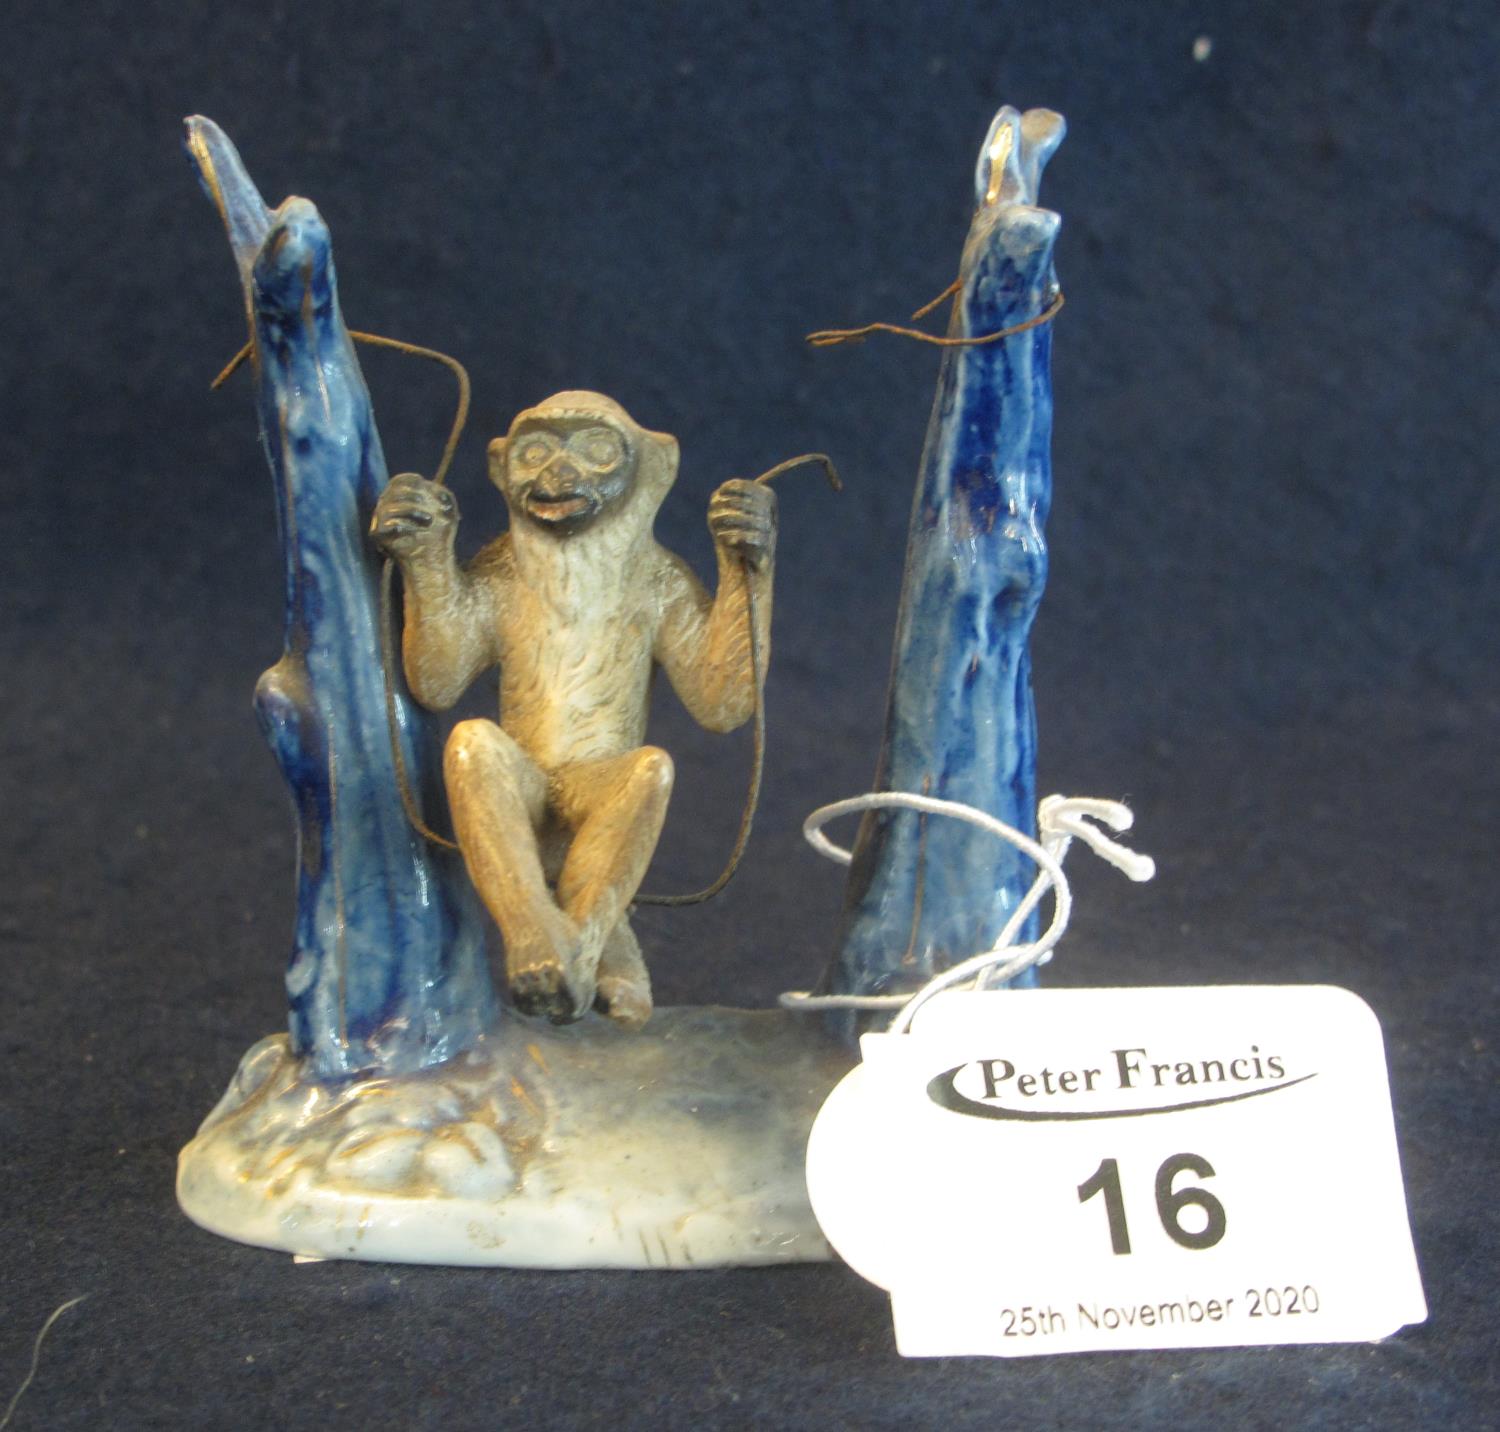 19th Century German porcelain figure of a monkey on a swing, impressed marks to base, 8cm high